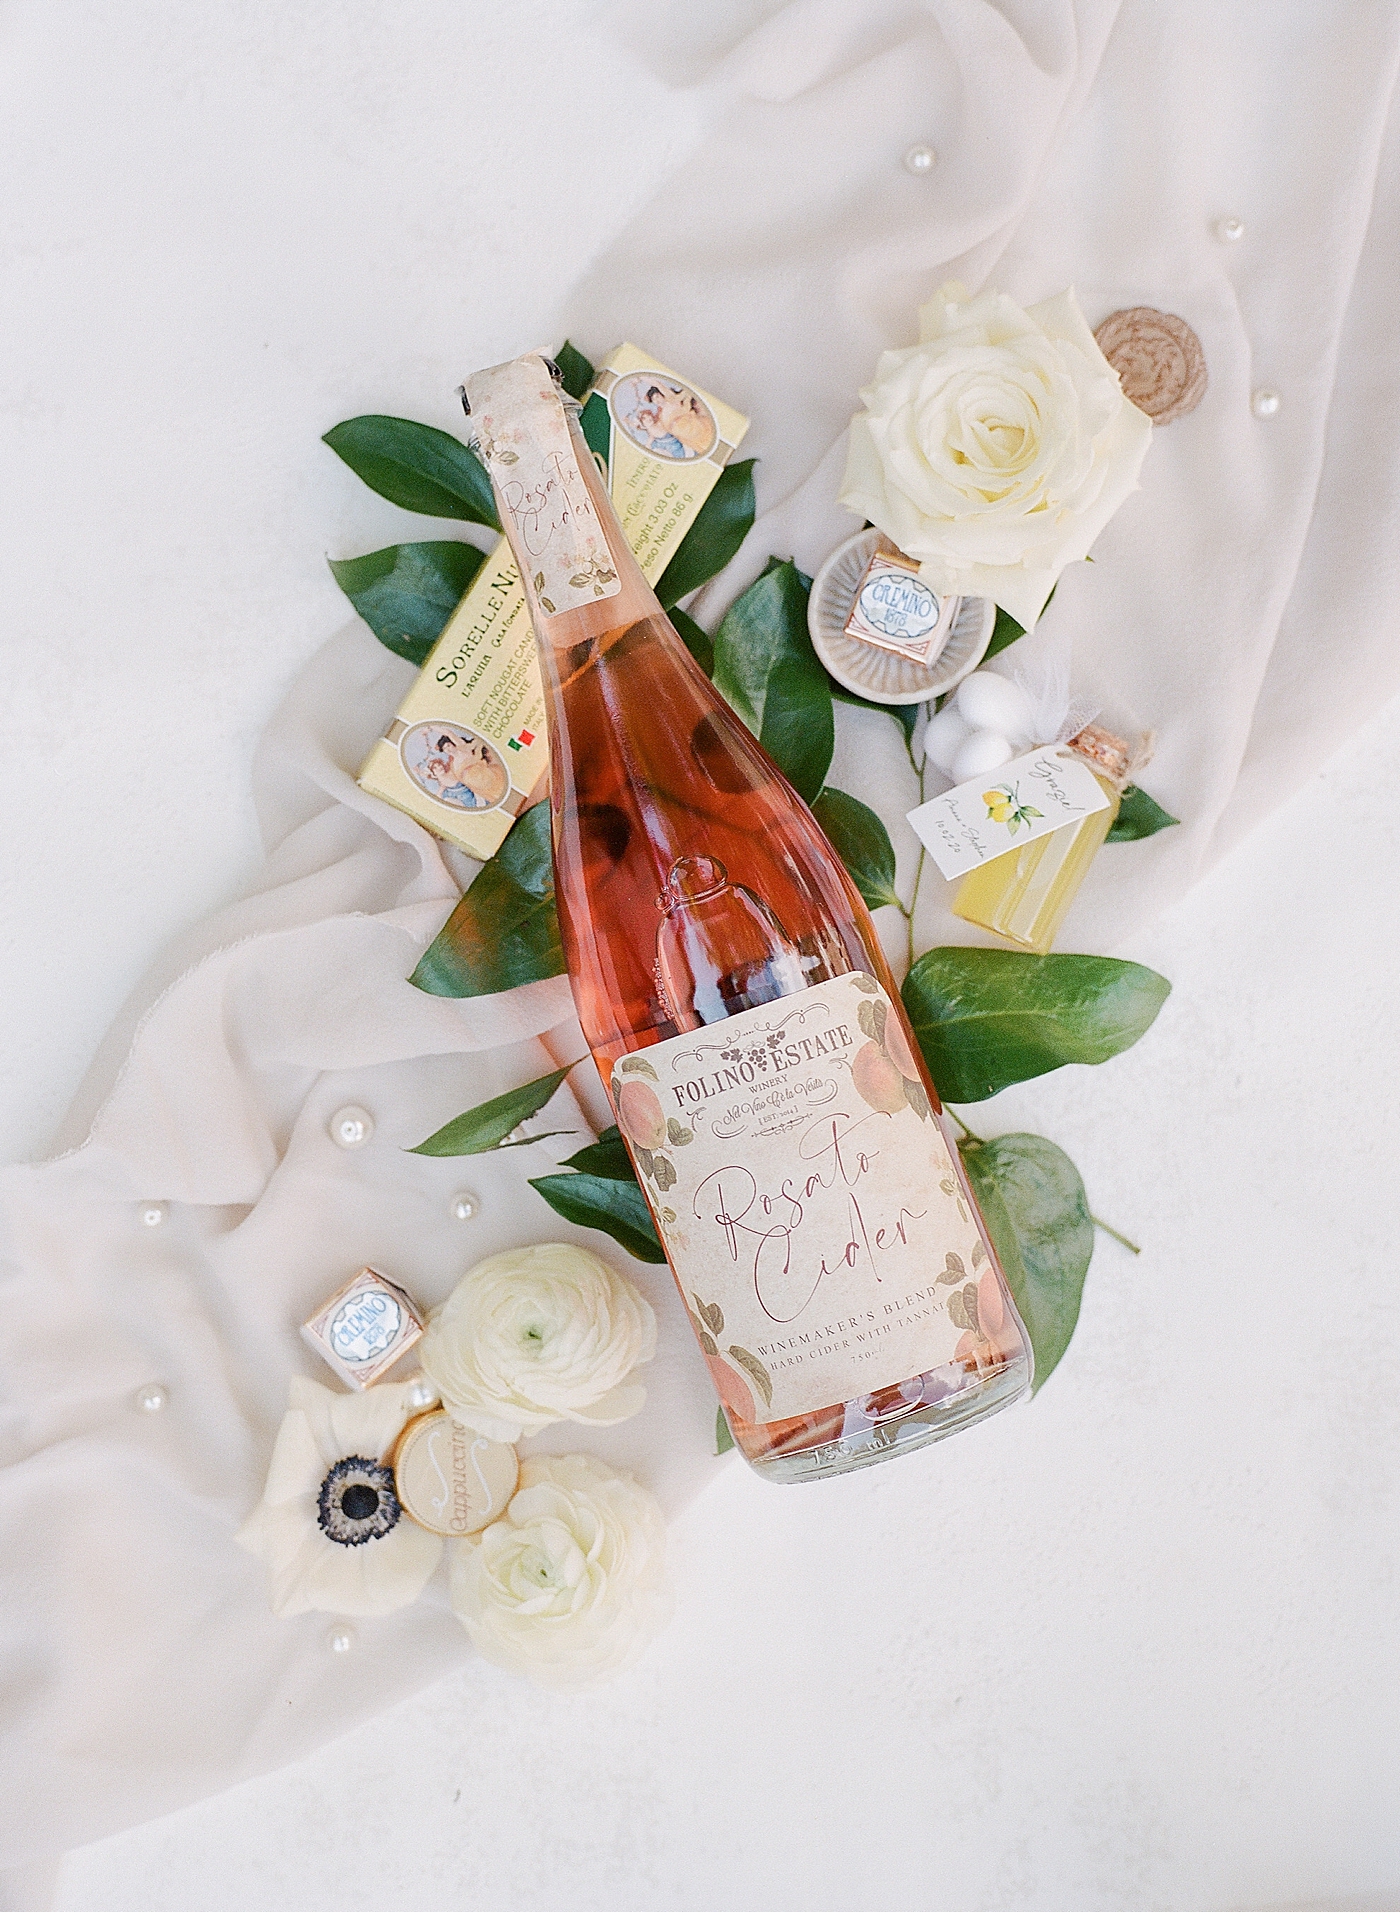 Bottle of rose with bridal details and flowers | Photo by Hope Helmuth Photography